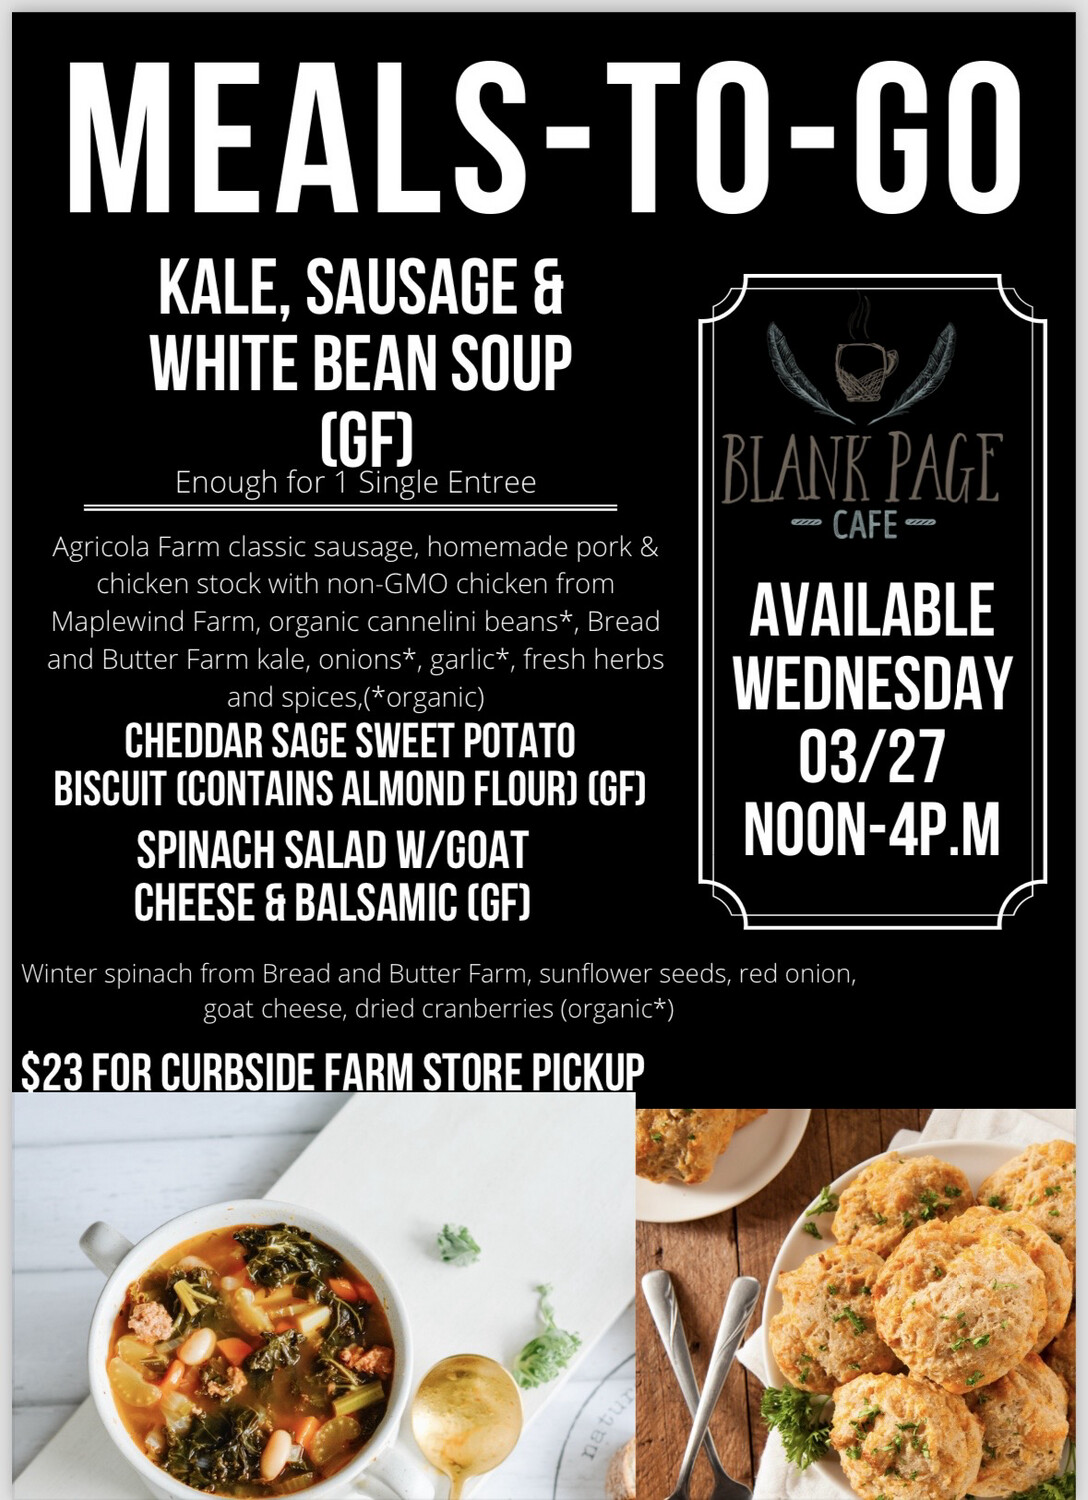 Wednesday 3/27 NOON-4PM PICKUP - Sausage, Kale & White Bean Soup + Cheddar Sage Sweet Potato Scone + Spinach Salad W/Goat Cheese and Balsamic